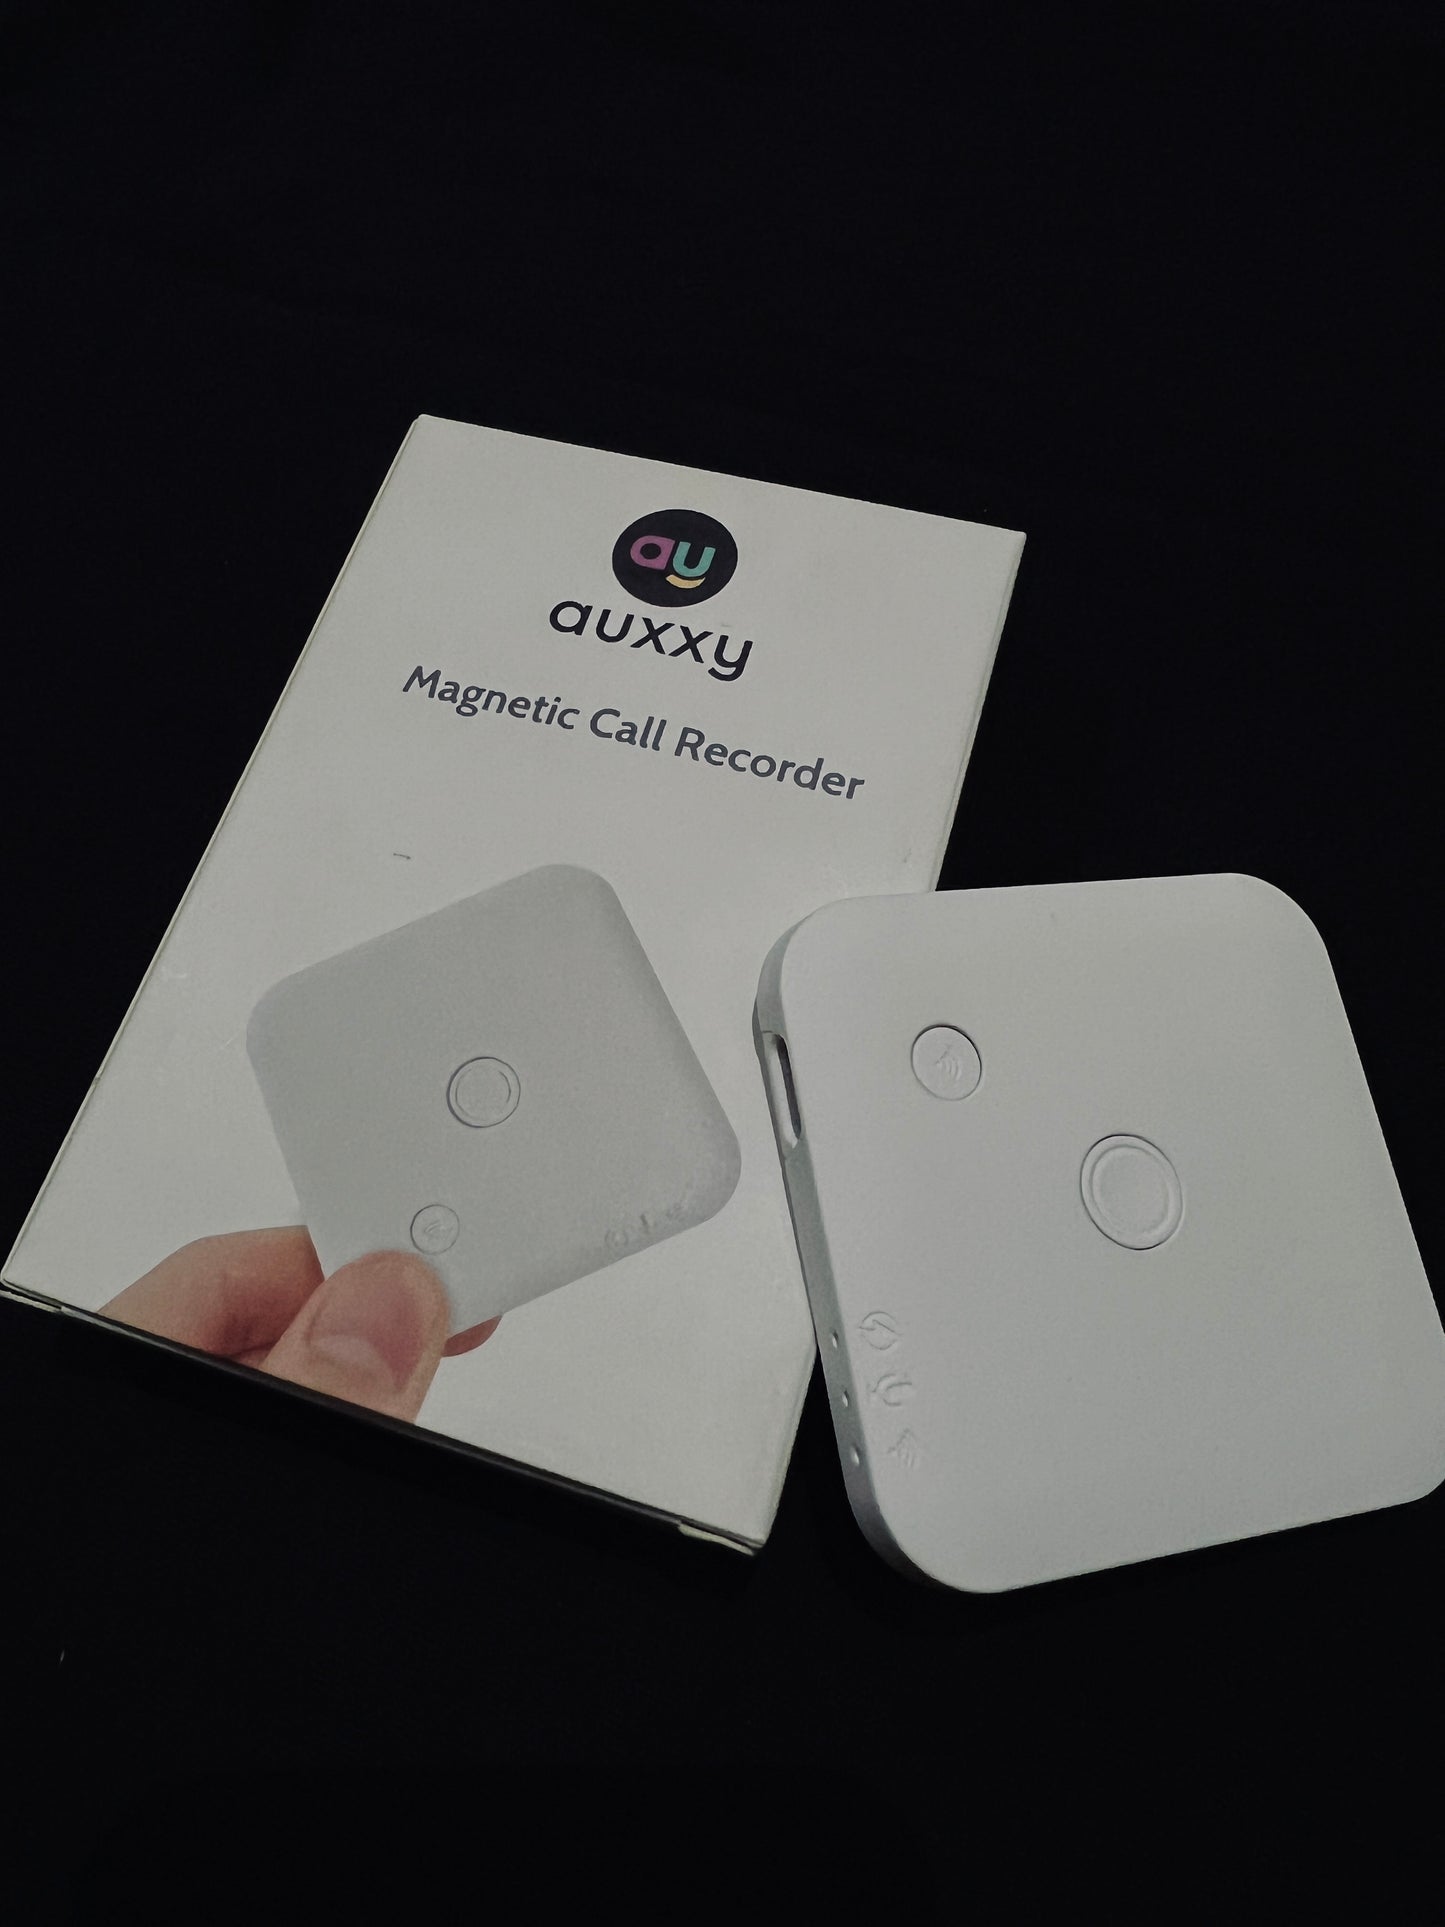 Magnetic Call Recorder For iPhone with wireless instant Transfer